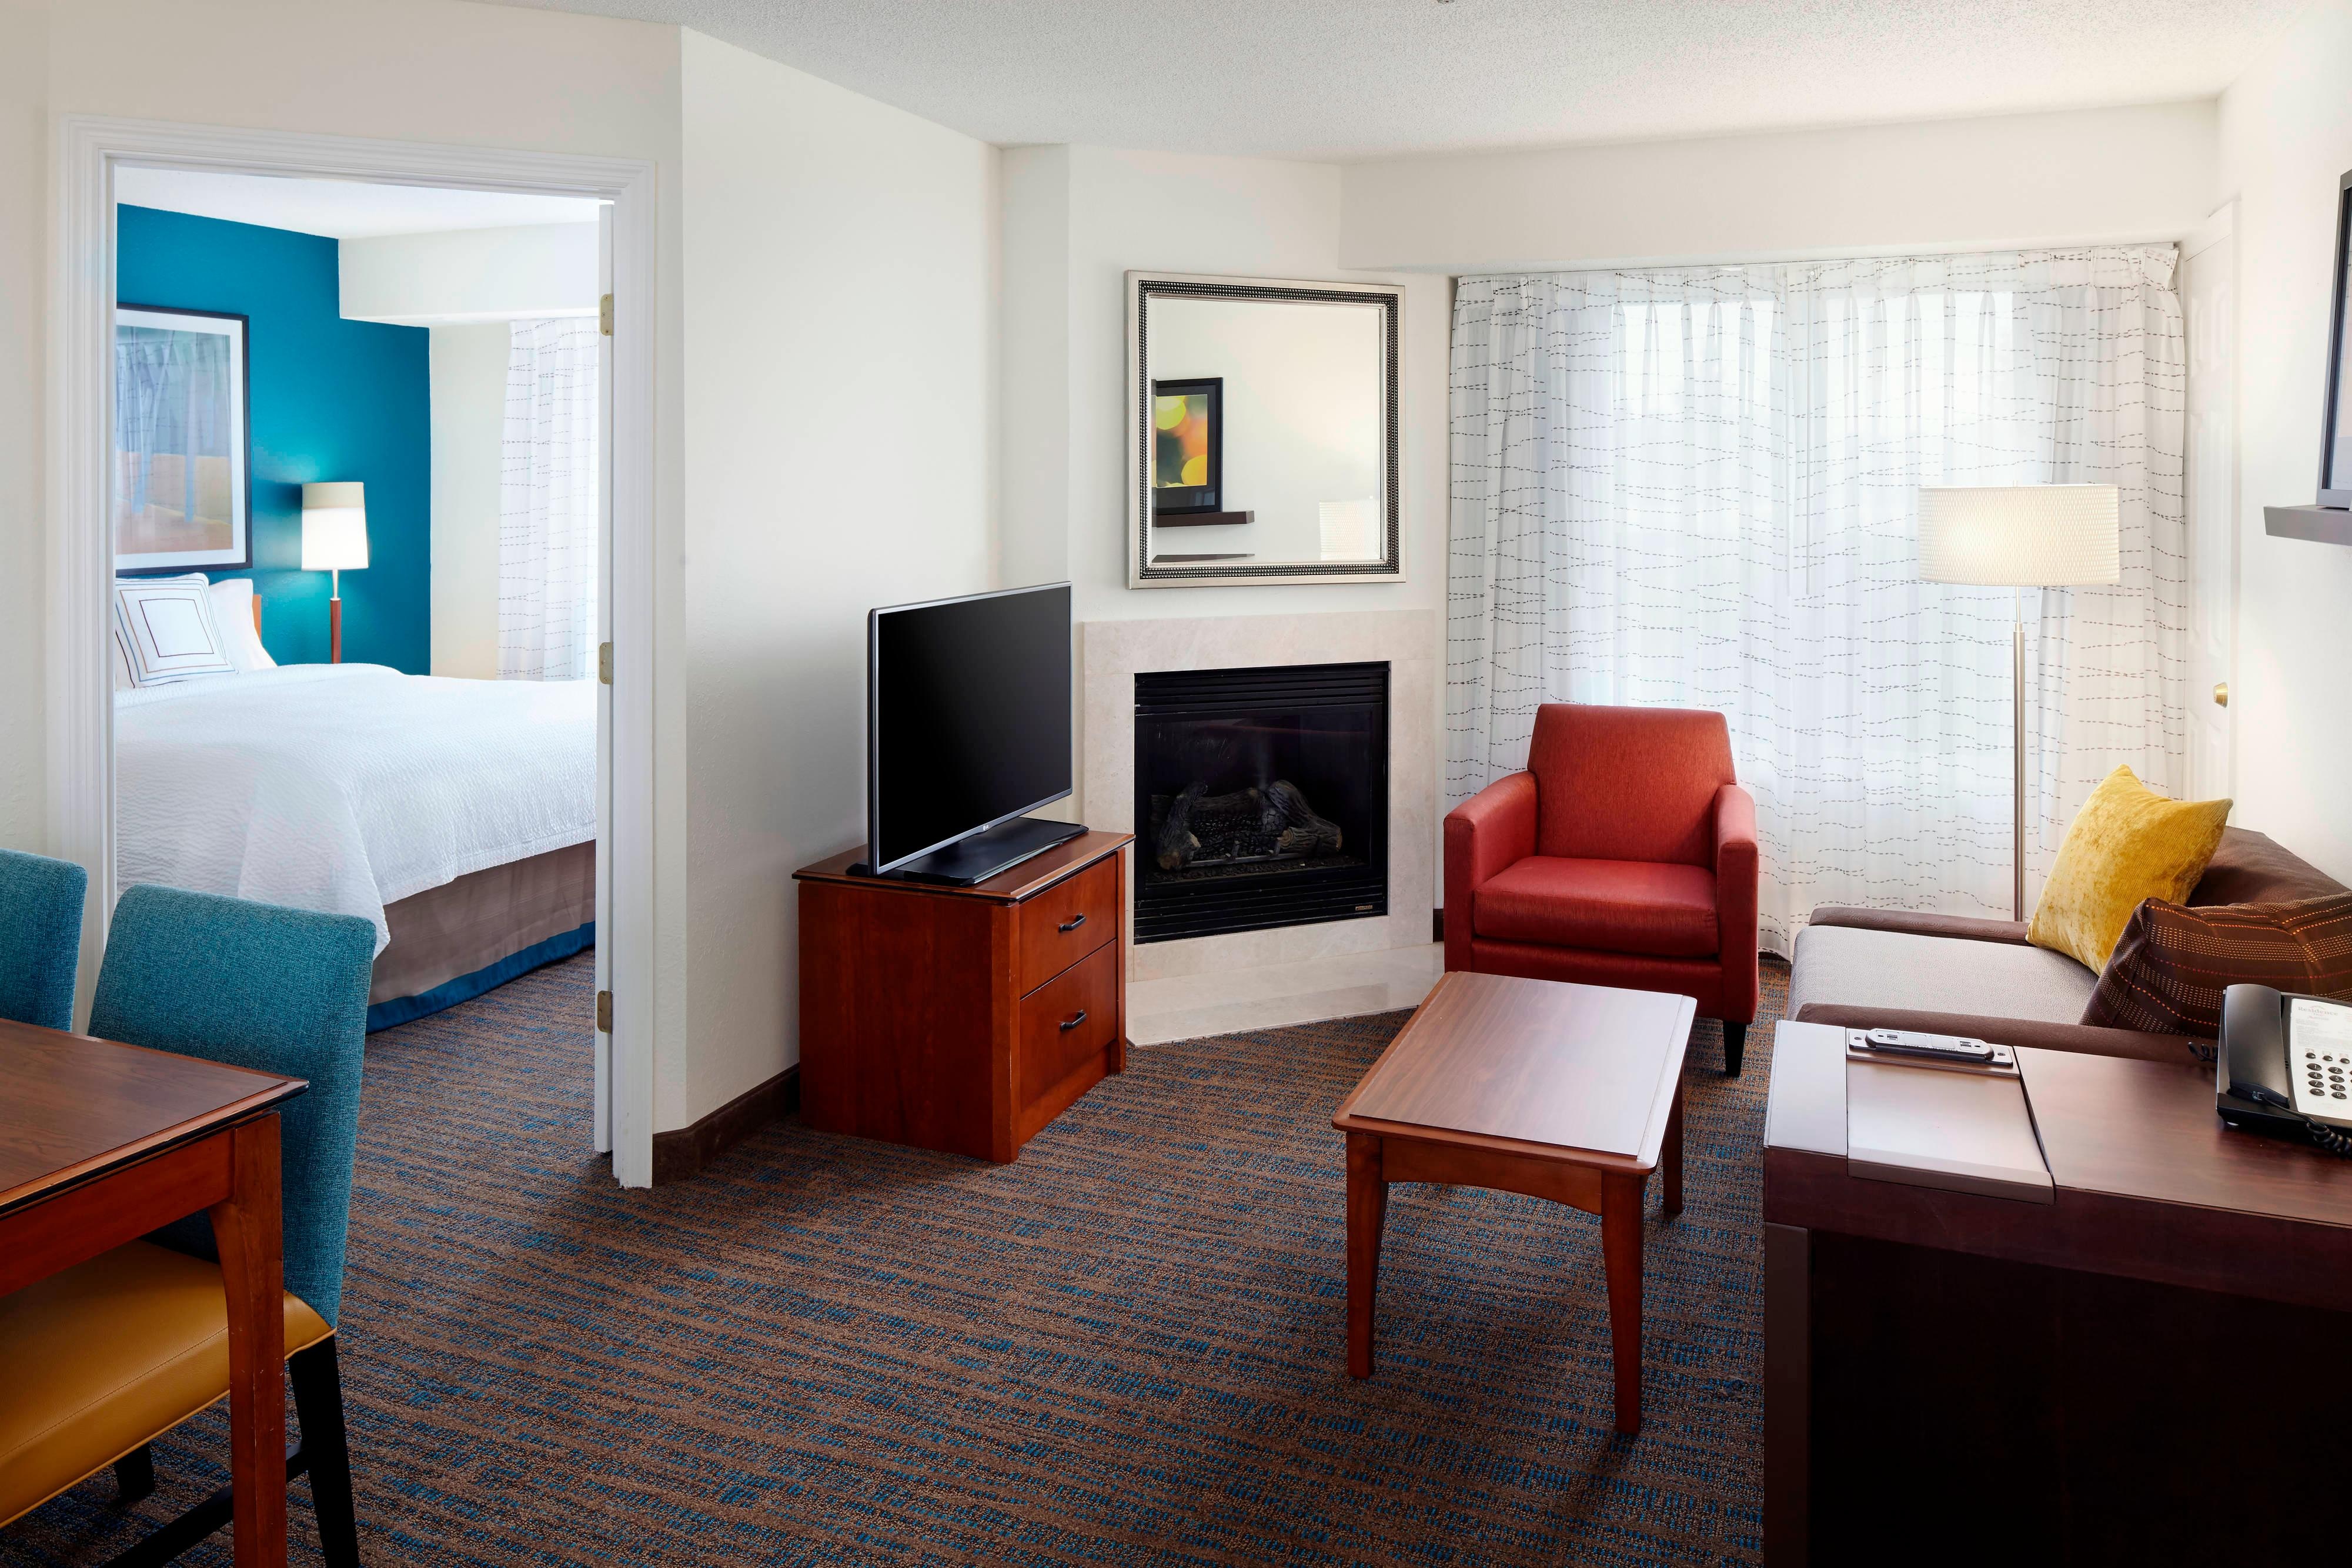 Extended Stay Hotel in Earth City, MO | Residence Inn